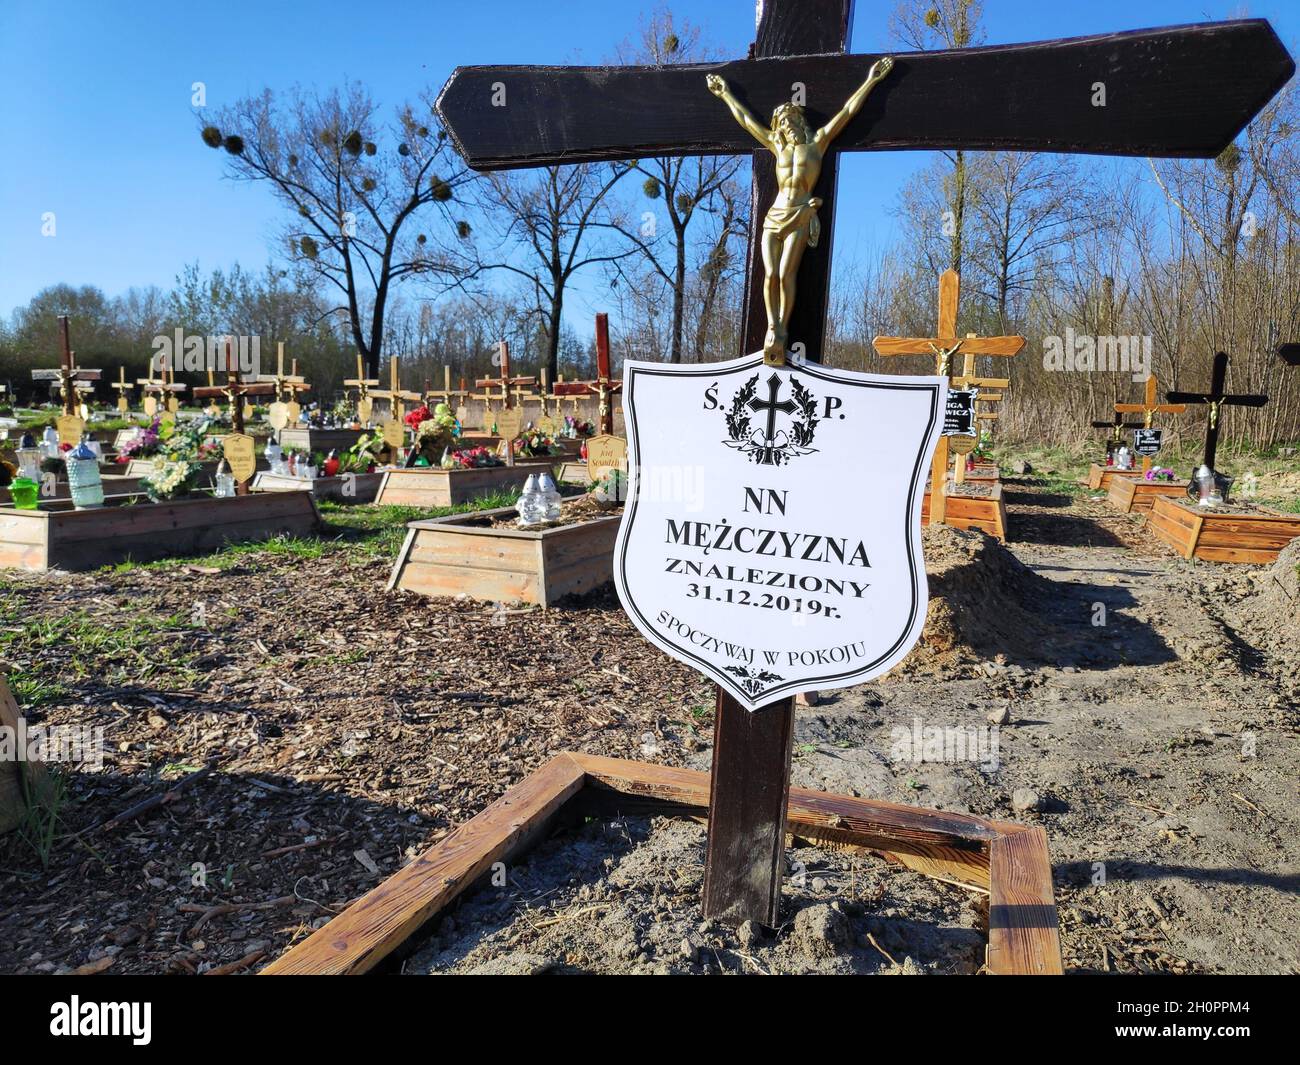 BYTOM, POLAND - APRIL 12, 2020: Simple grave of an unidentified person found by police in Poland. NN Mezczyzna means Unidentified Male (John Doe) in P Stock Photo